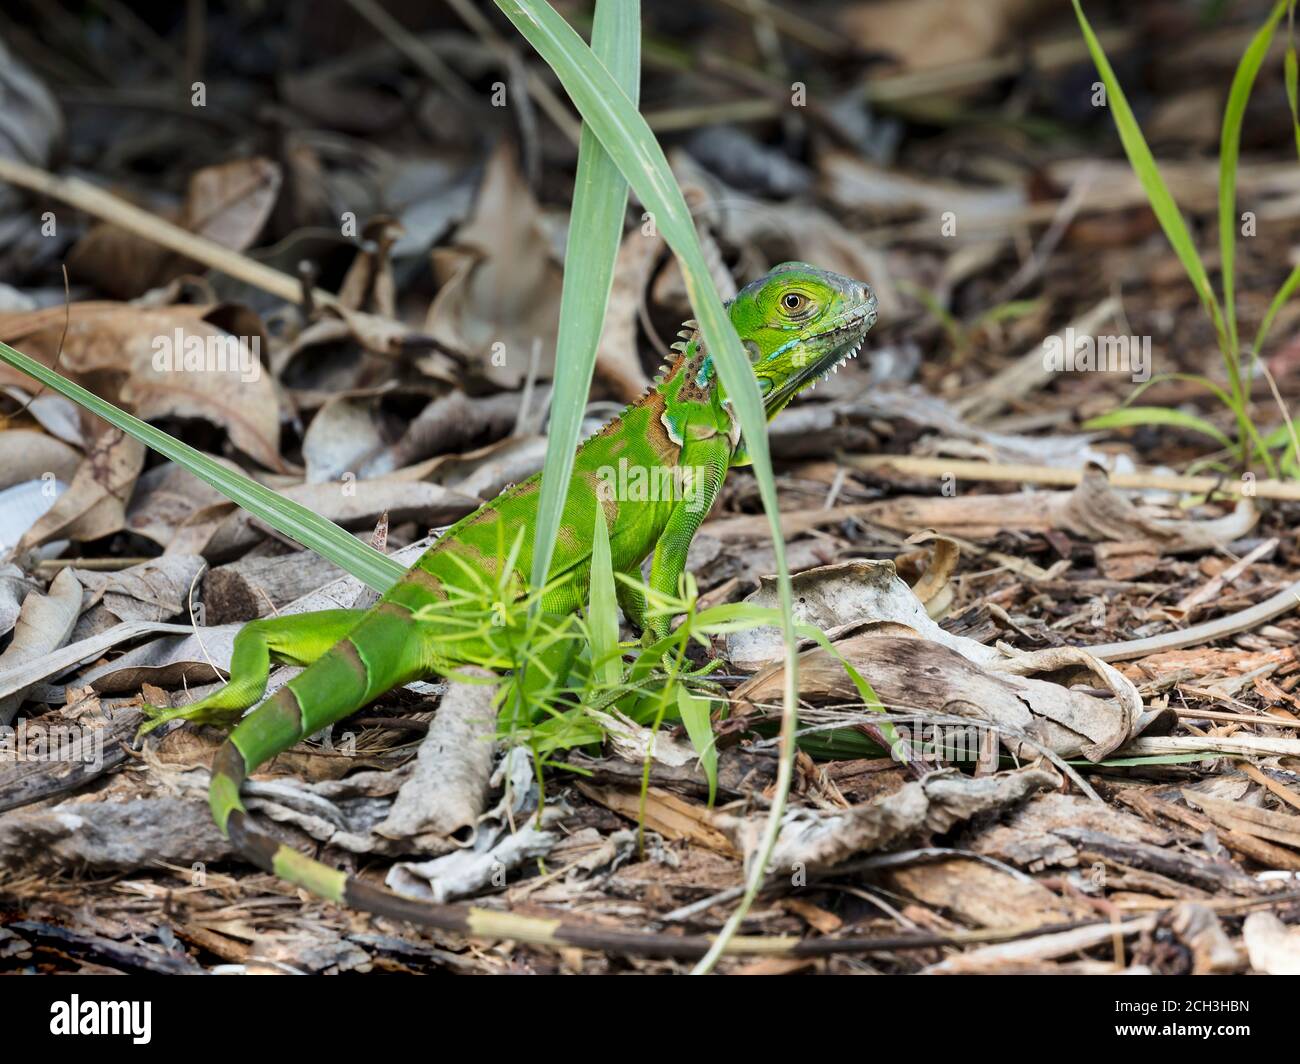 Green iguana crawls on the forest floor, Fort Lauderdale, Florida, USA Stock Photo